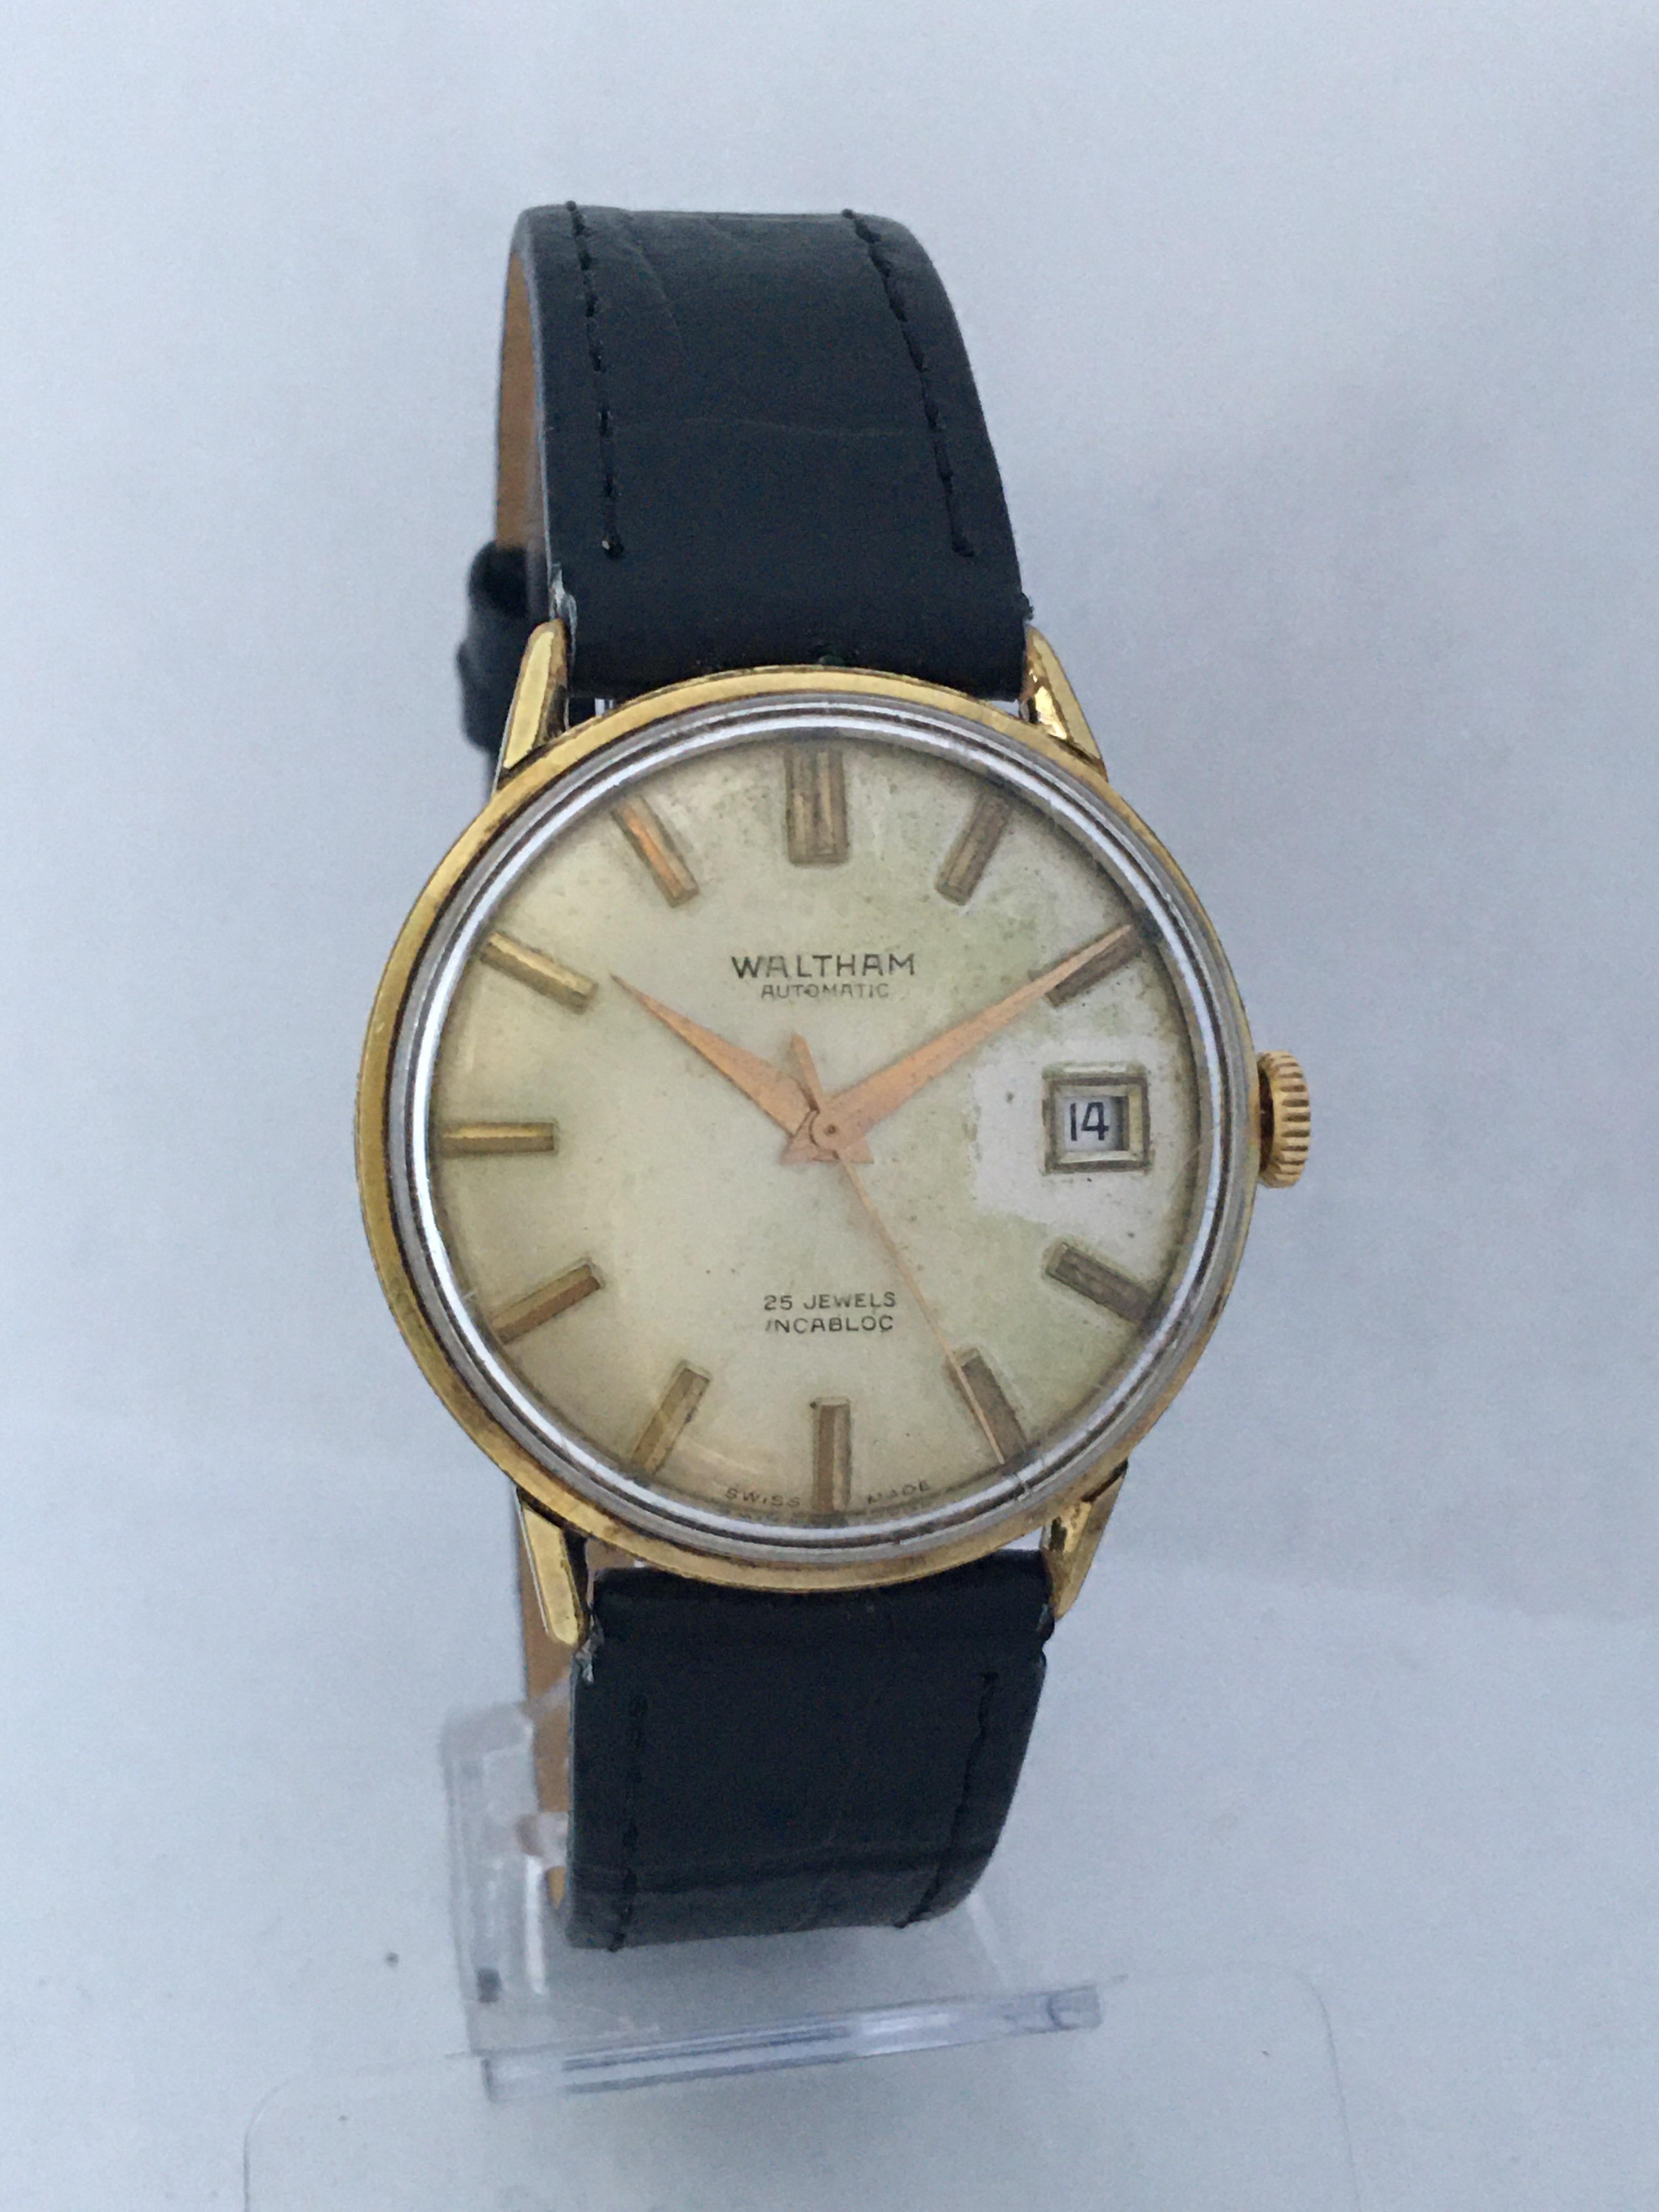 Vintage 1960s Gold-Plated and Stainless Steel Back Waltham Automatic Watch For Sale 5